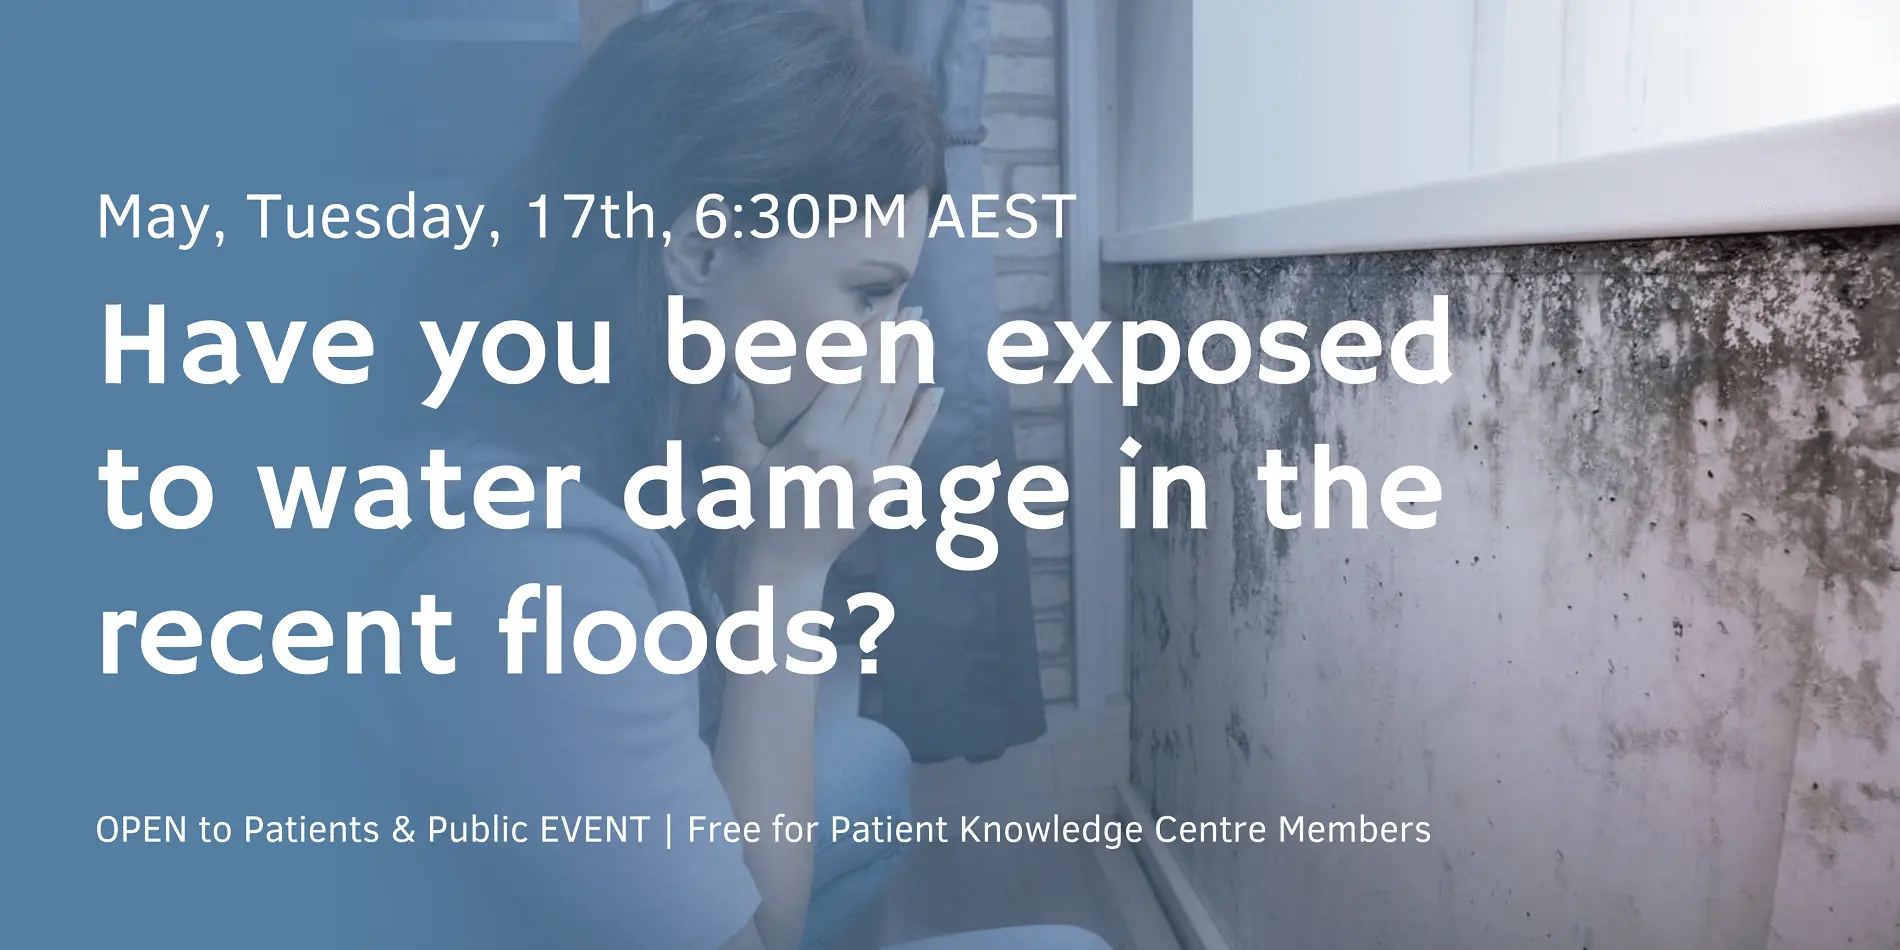 Have you been exposed to water damage in the recent floods